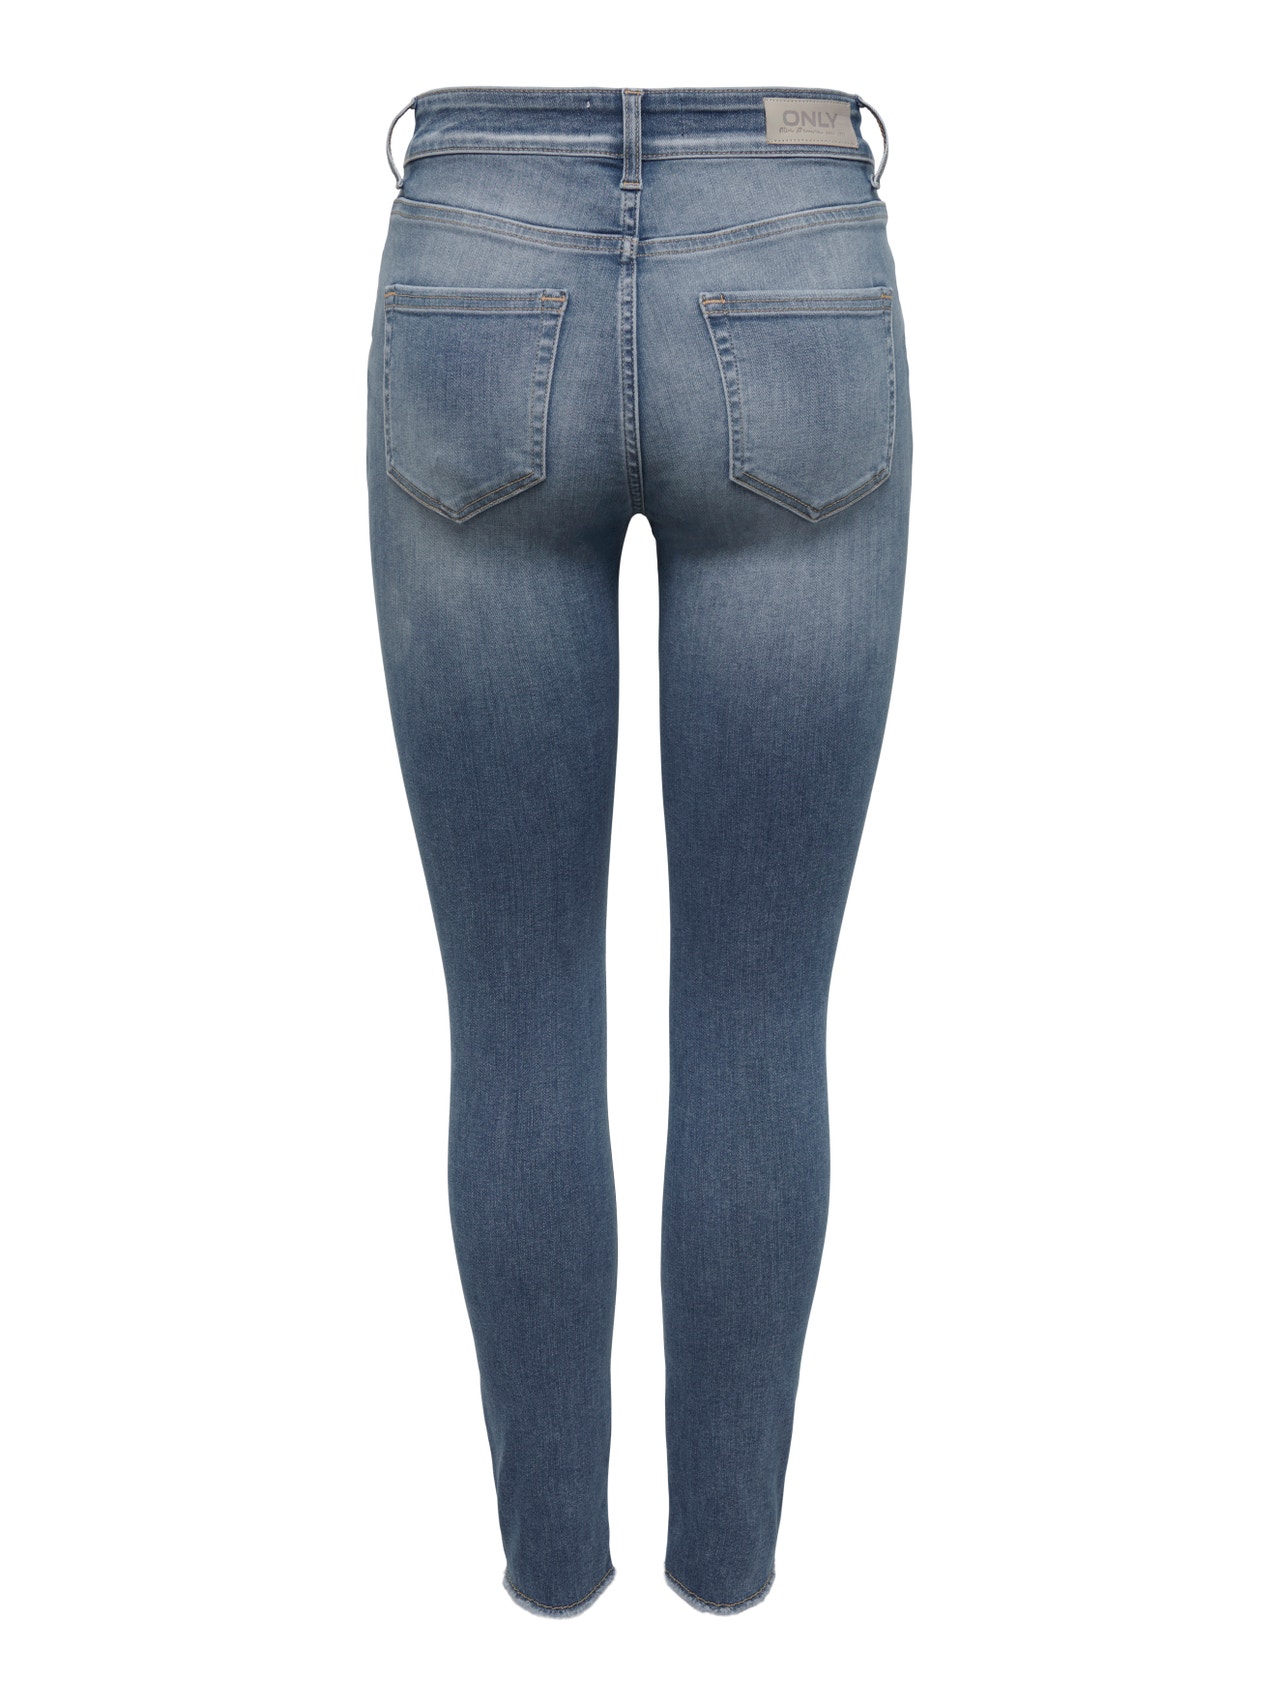 ONLY Skinny Fit Mid waist Jeans -Special Blue Grey Denim - 15269046